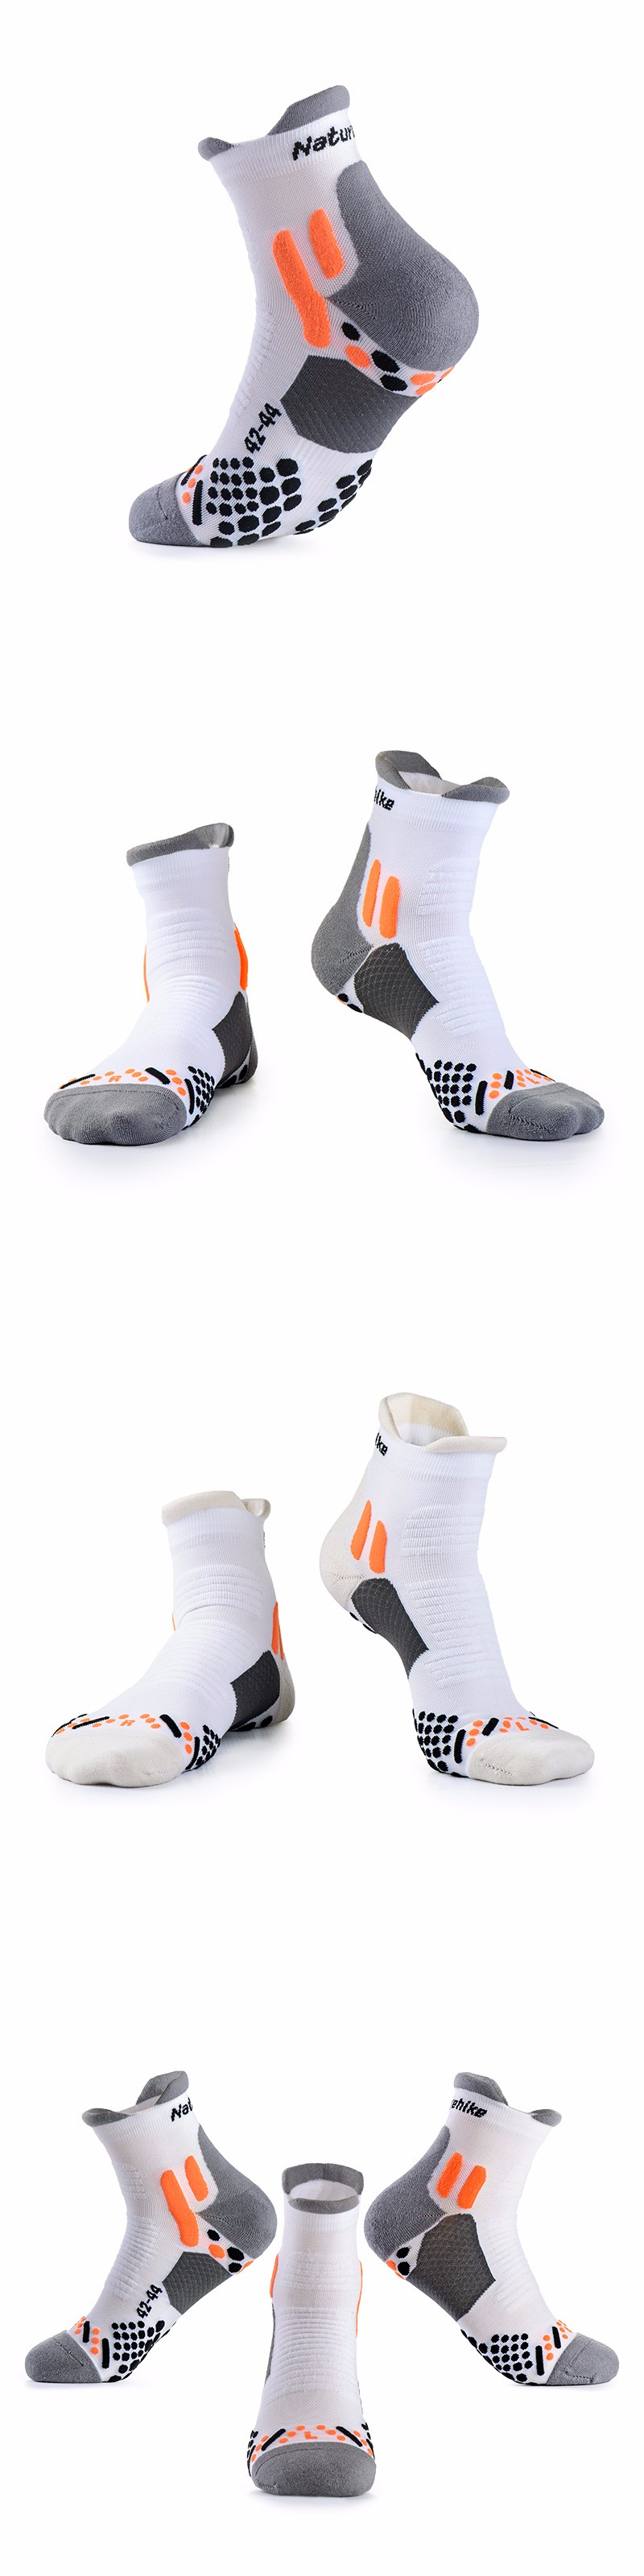 Naturehike-NH17A002-M-Unisex-Sports-Socks-Quick-Drying-Running-Breathable-Hiking-Stockings-1201222